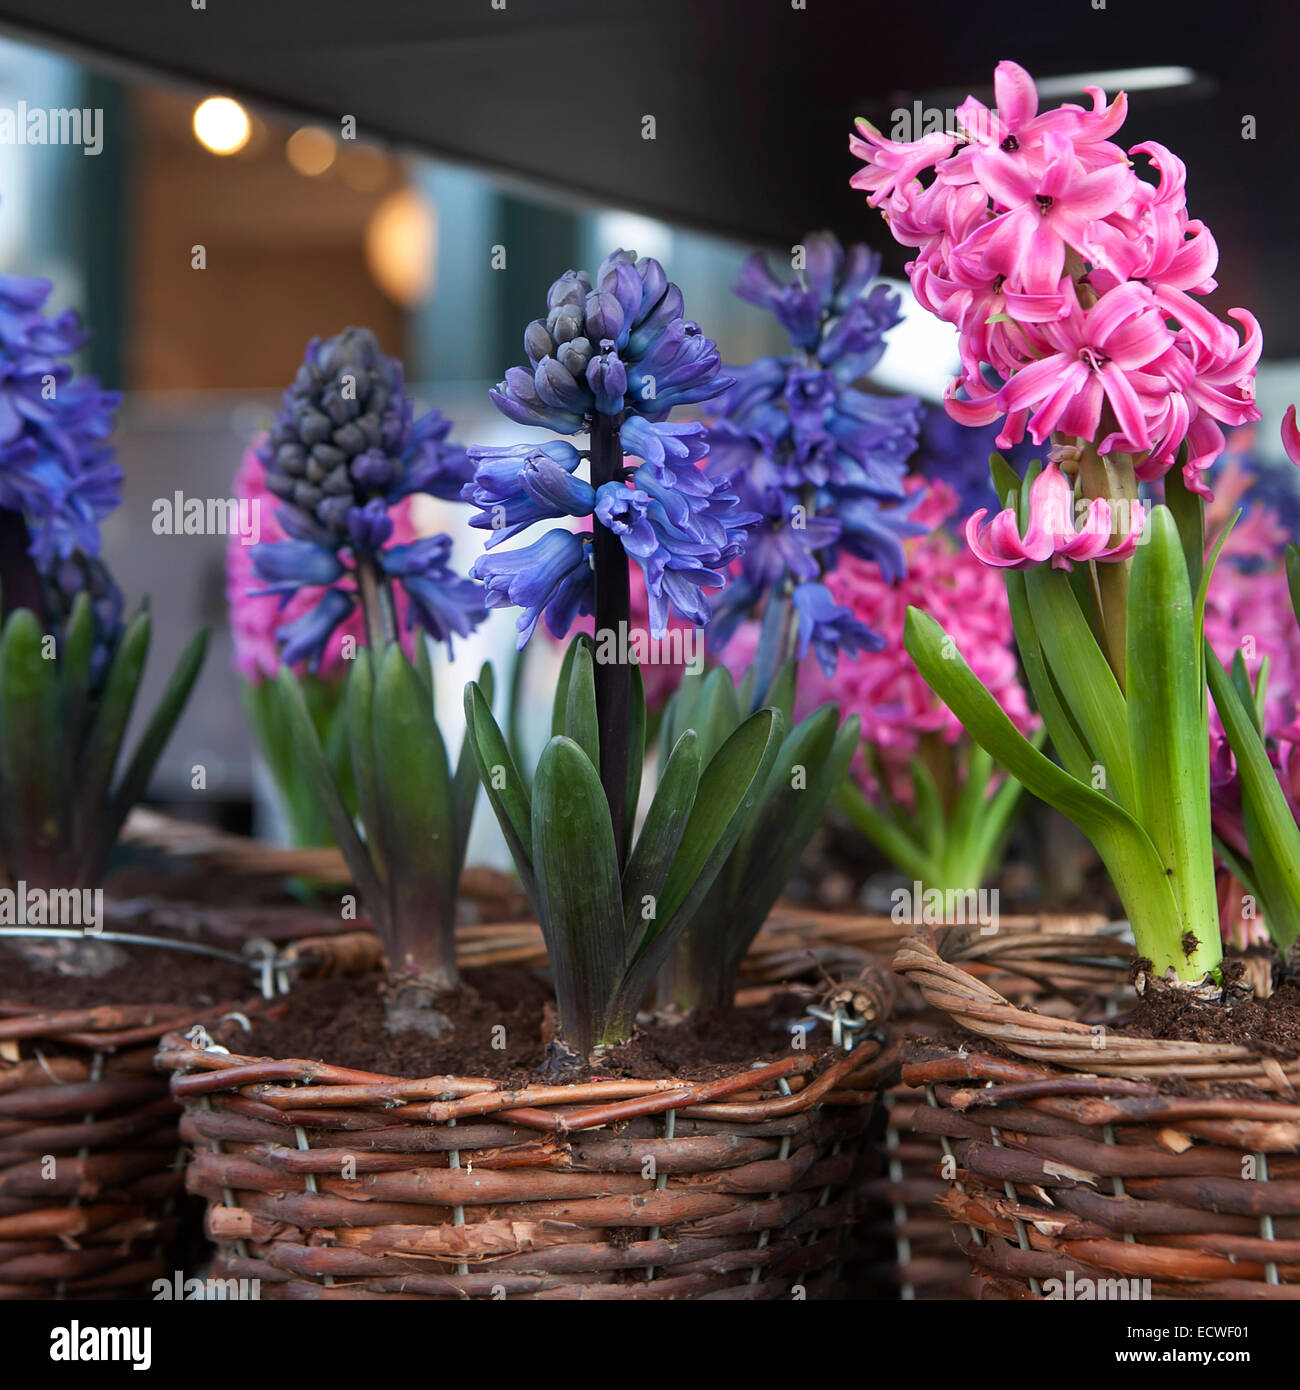 Blue and pink hyacinth flowers on wooden table Stock Photo